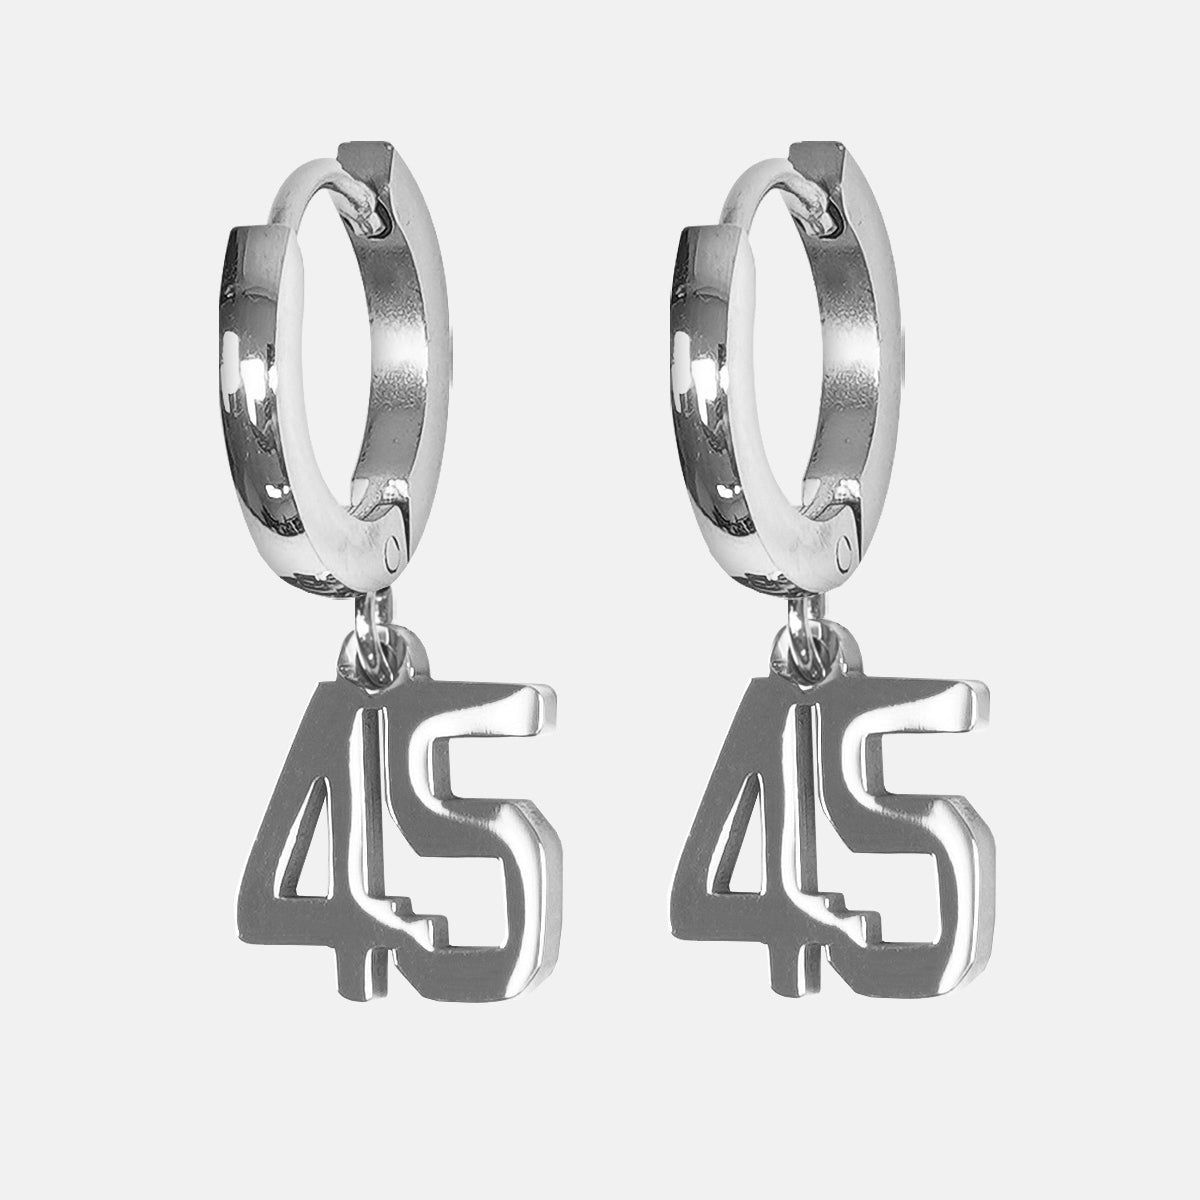 45 Number Earring - Stainless Steel